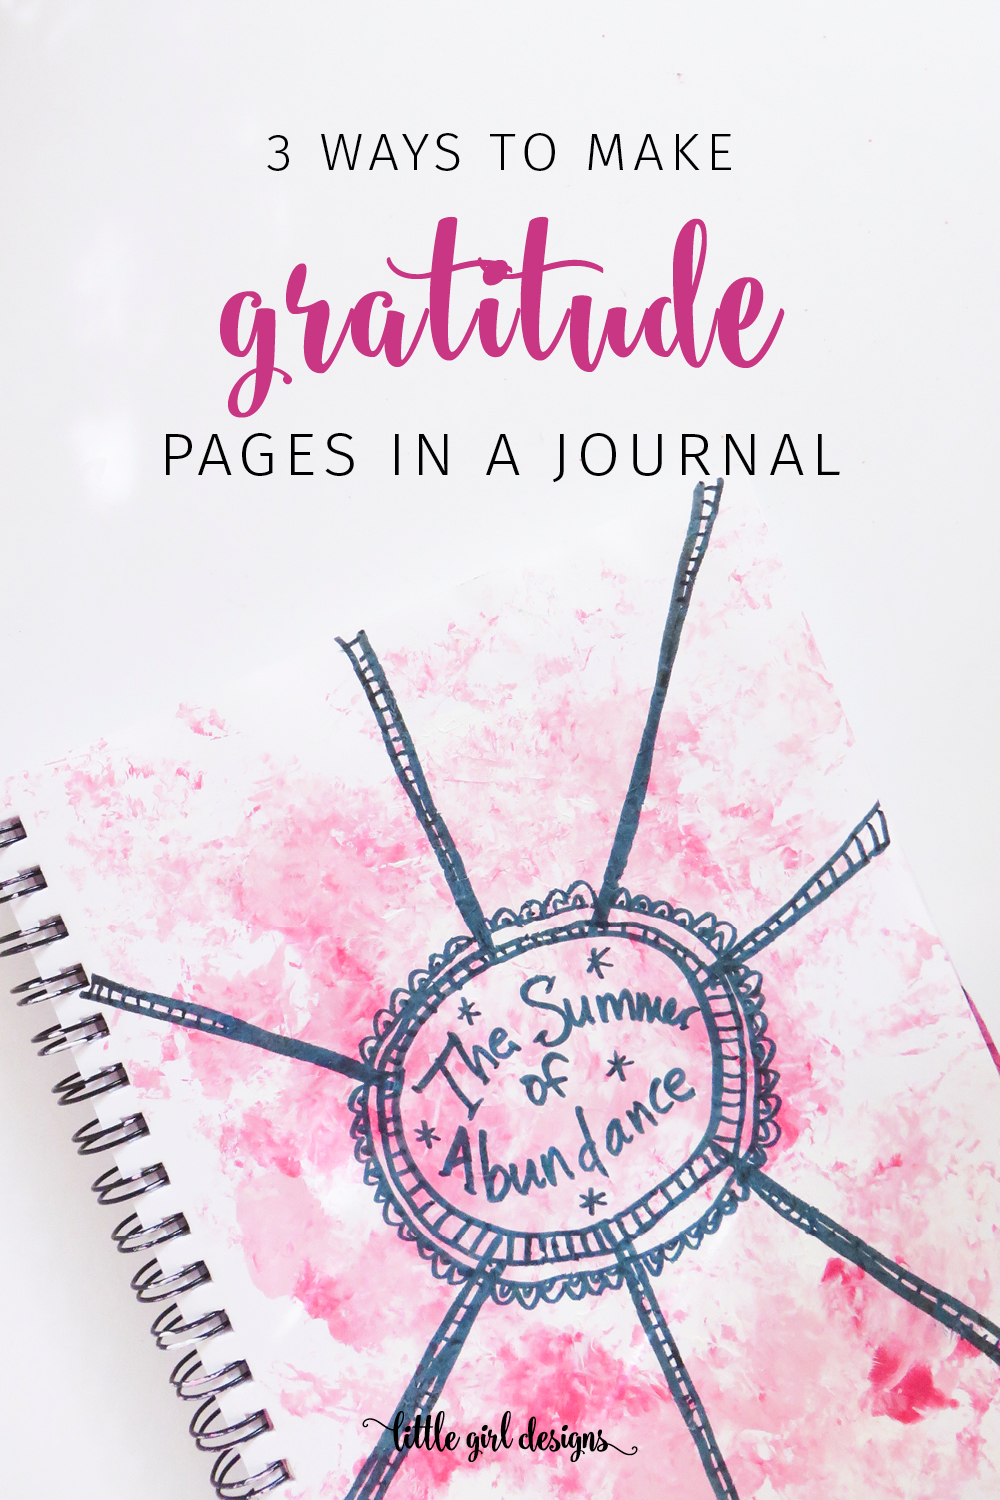 Want to start a gratitude journal? You can DIY your own in an art journal, bullet journal, or regular journal. Here are three fun ways to make gratitude pages in your journal. Grab your paints—this is going to be colorful and fun! Oh, and children LOVE these prompts and ideas too. :)